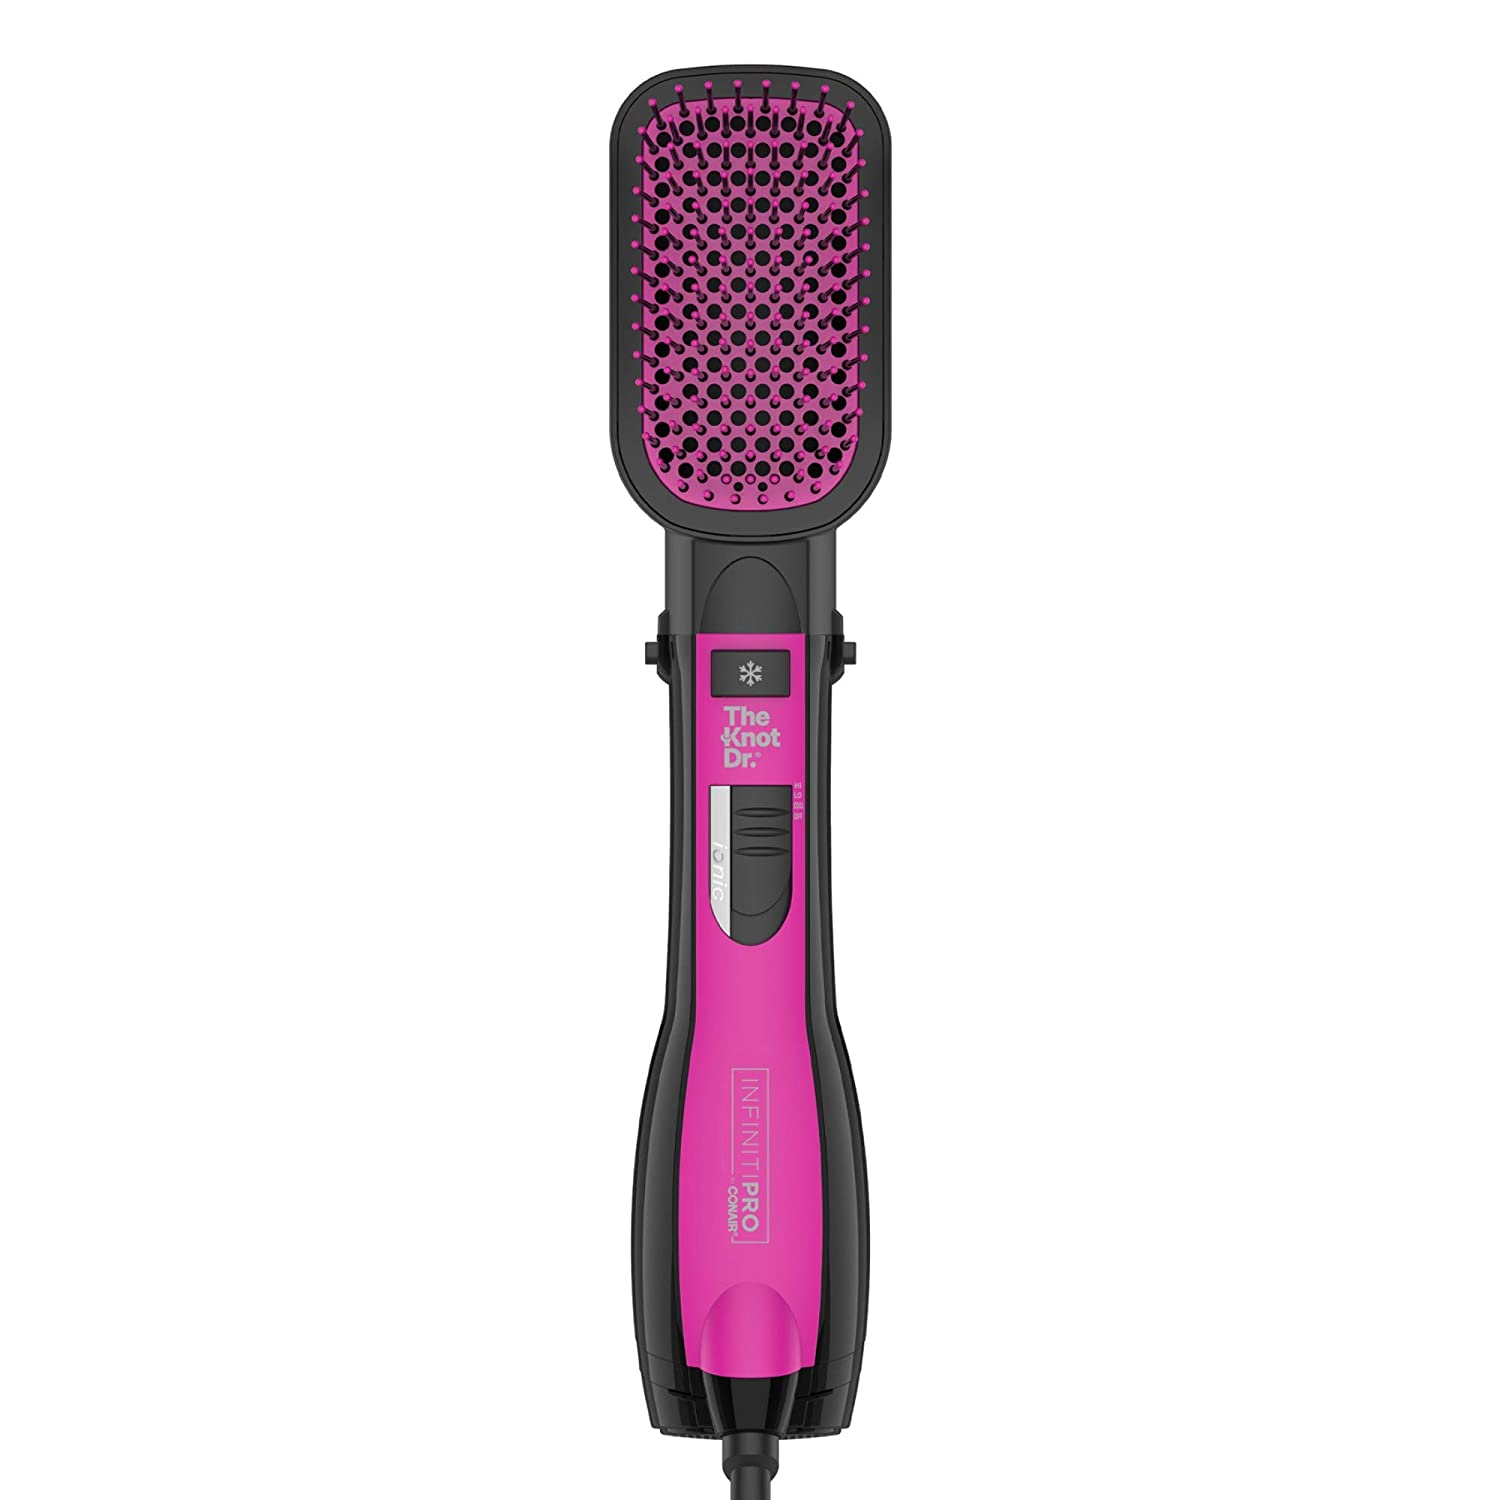 INFINITIPRO BY CONAIR The Knot Dr. All-in-One Smoothing Dryer Brush